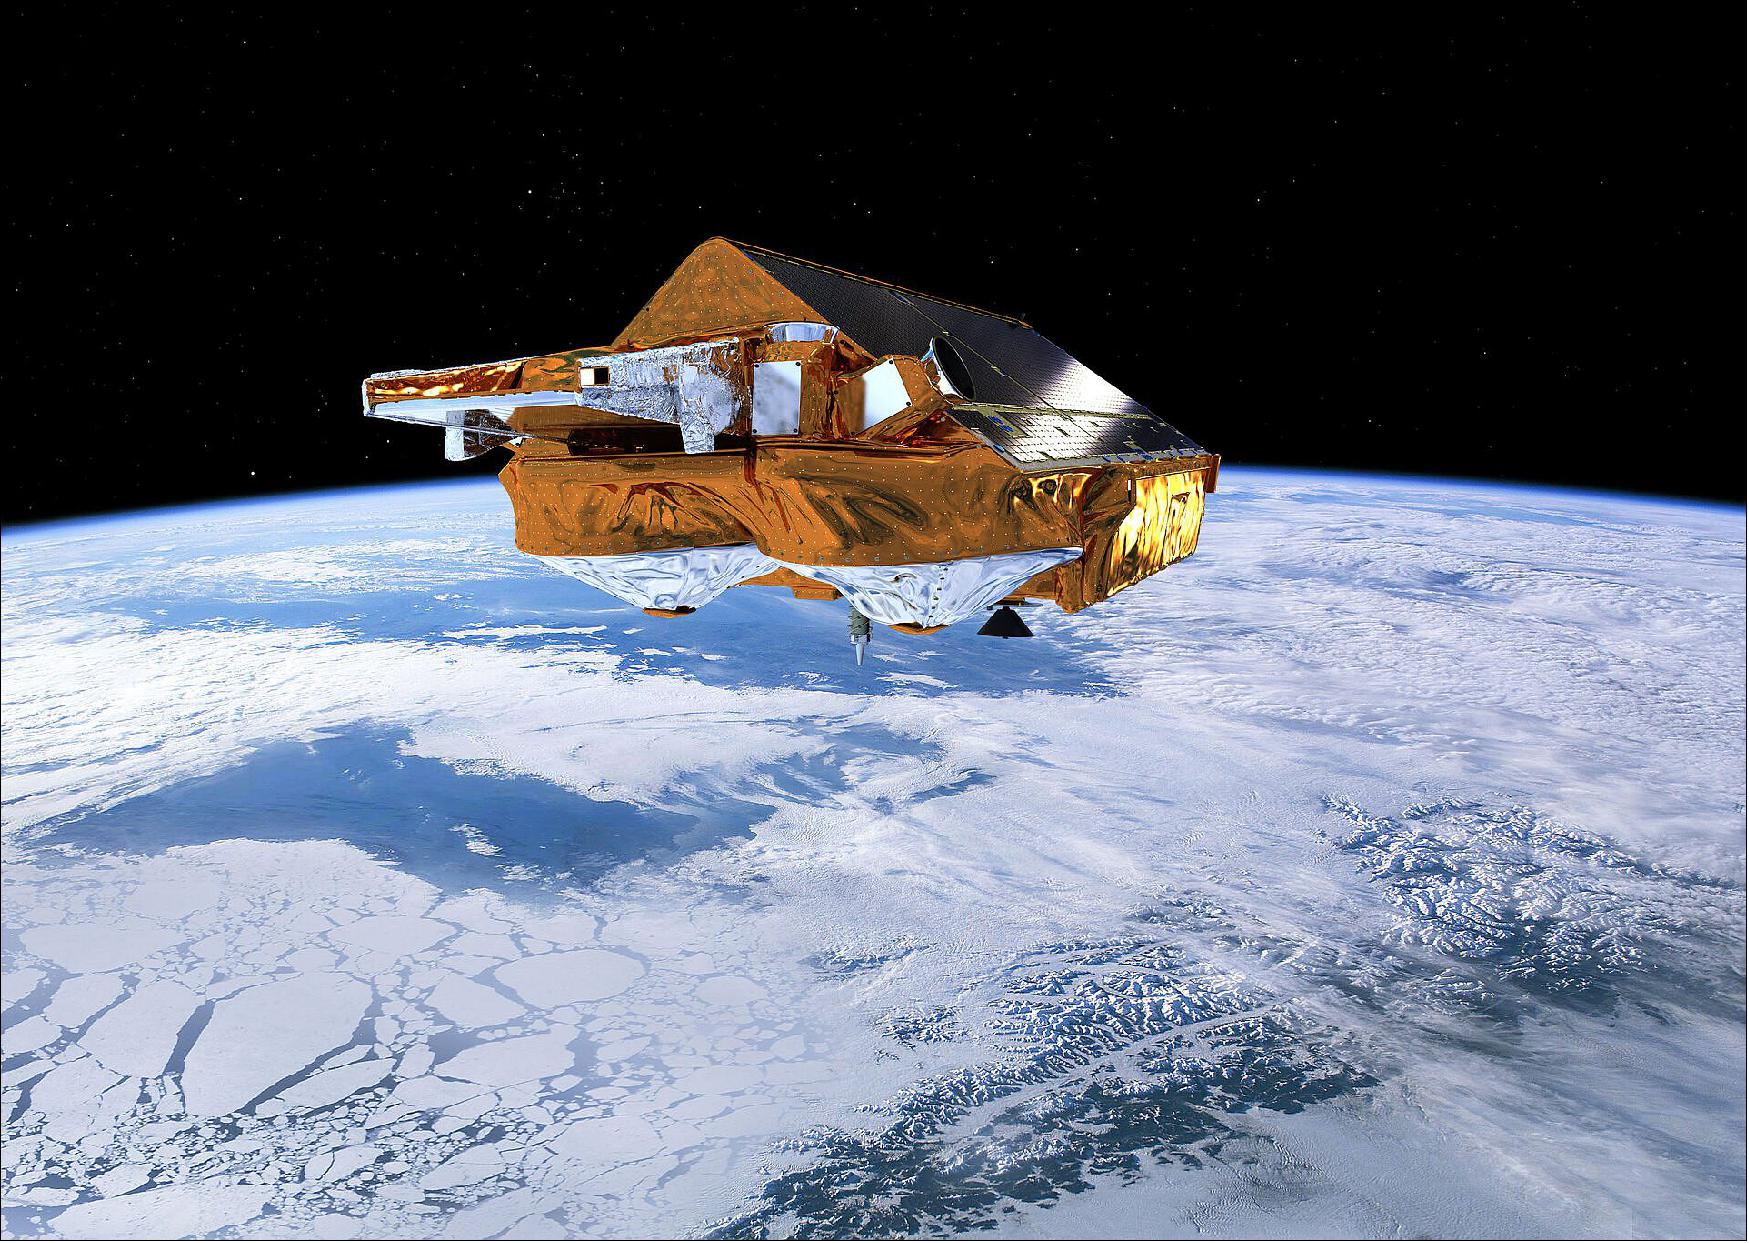 Figure 3: ESA’s Earth Explorer CryoSat mission is dedicated to precise monitoring of changes in the thickness of marine ice floating in the polar oceans and variations in the thickness of the vast ice sheets that blanket Greenland and Antarctica. The satellite flies at an altitude of just over 700 km, reaching latitudes of 88° north and south, to maximize its coverage of the poles. Its main payload is an instrument called Synthetic Aperture Interferometric Radar Altimeter (SIRAL). Previous radar altimeters had been optimized for operations over the ocean and land, but SIRAL is the first sensor of its kind designed for ice, measuring changes at the margins of vast ice sheets and floating ice in polar oceans (ESA/AOES Medialab)